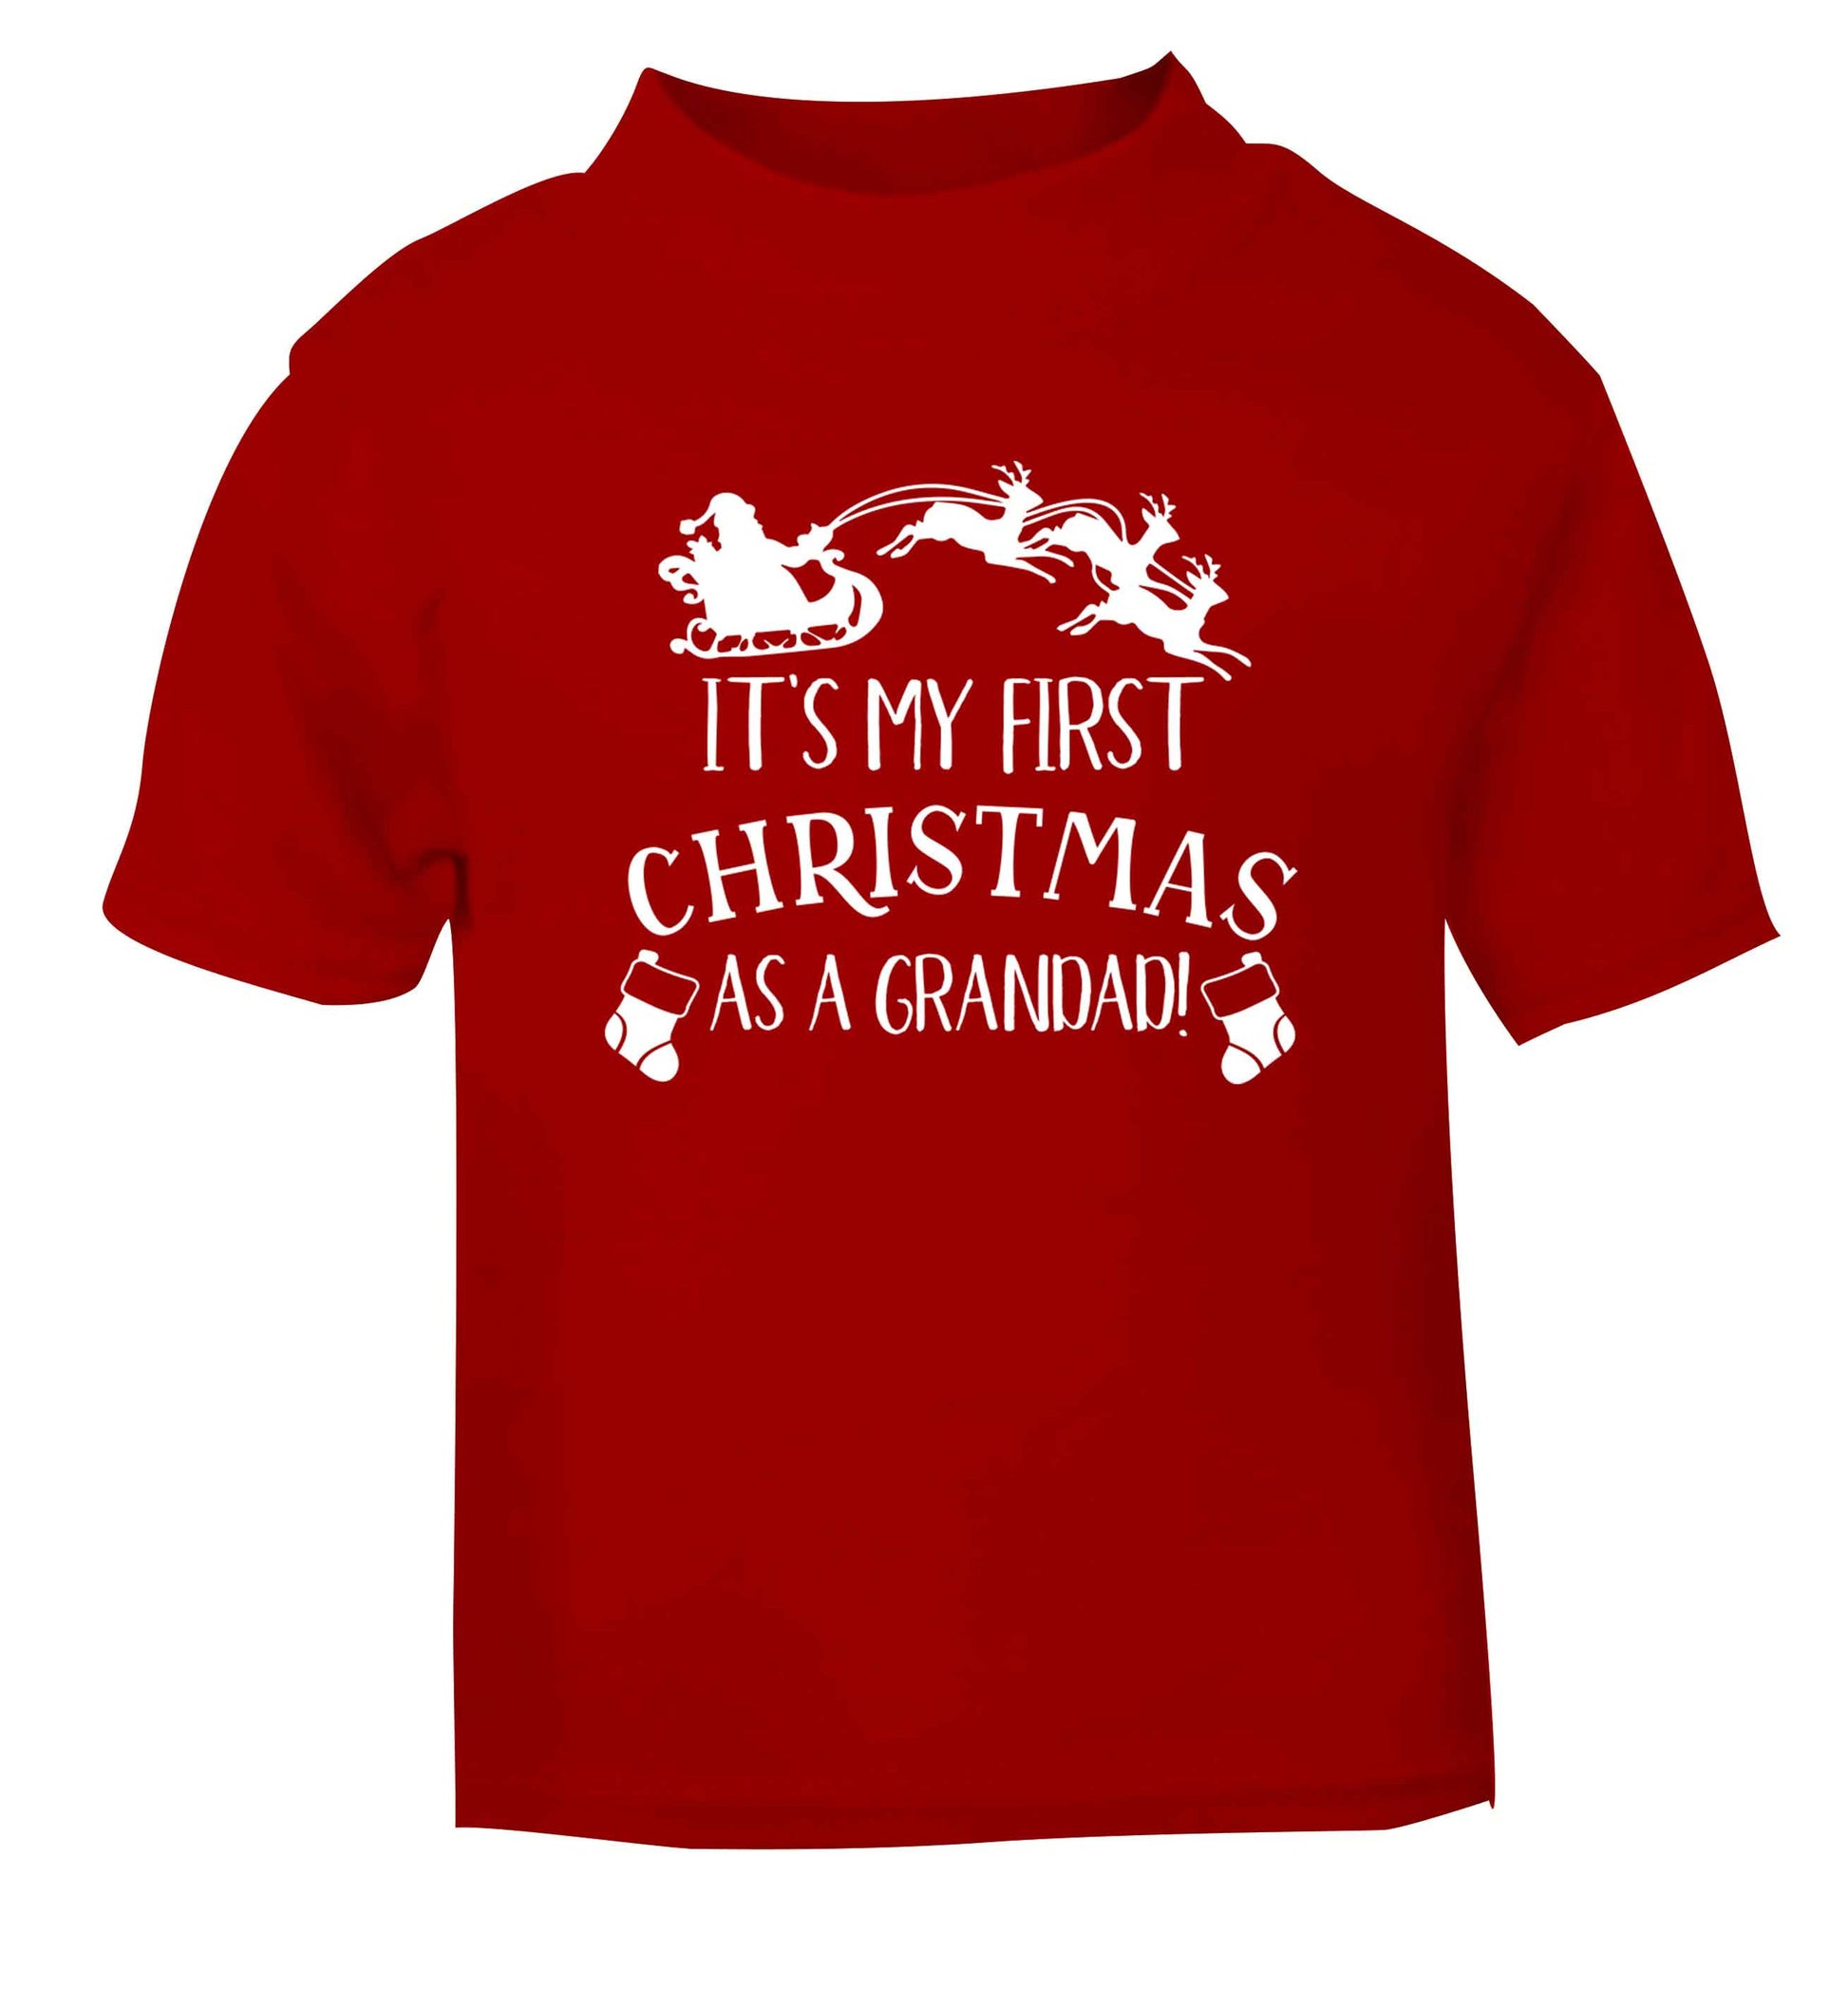 It's my first Christmas as a grandad! red Baby Toddler Tshirt 2 Years